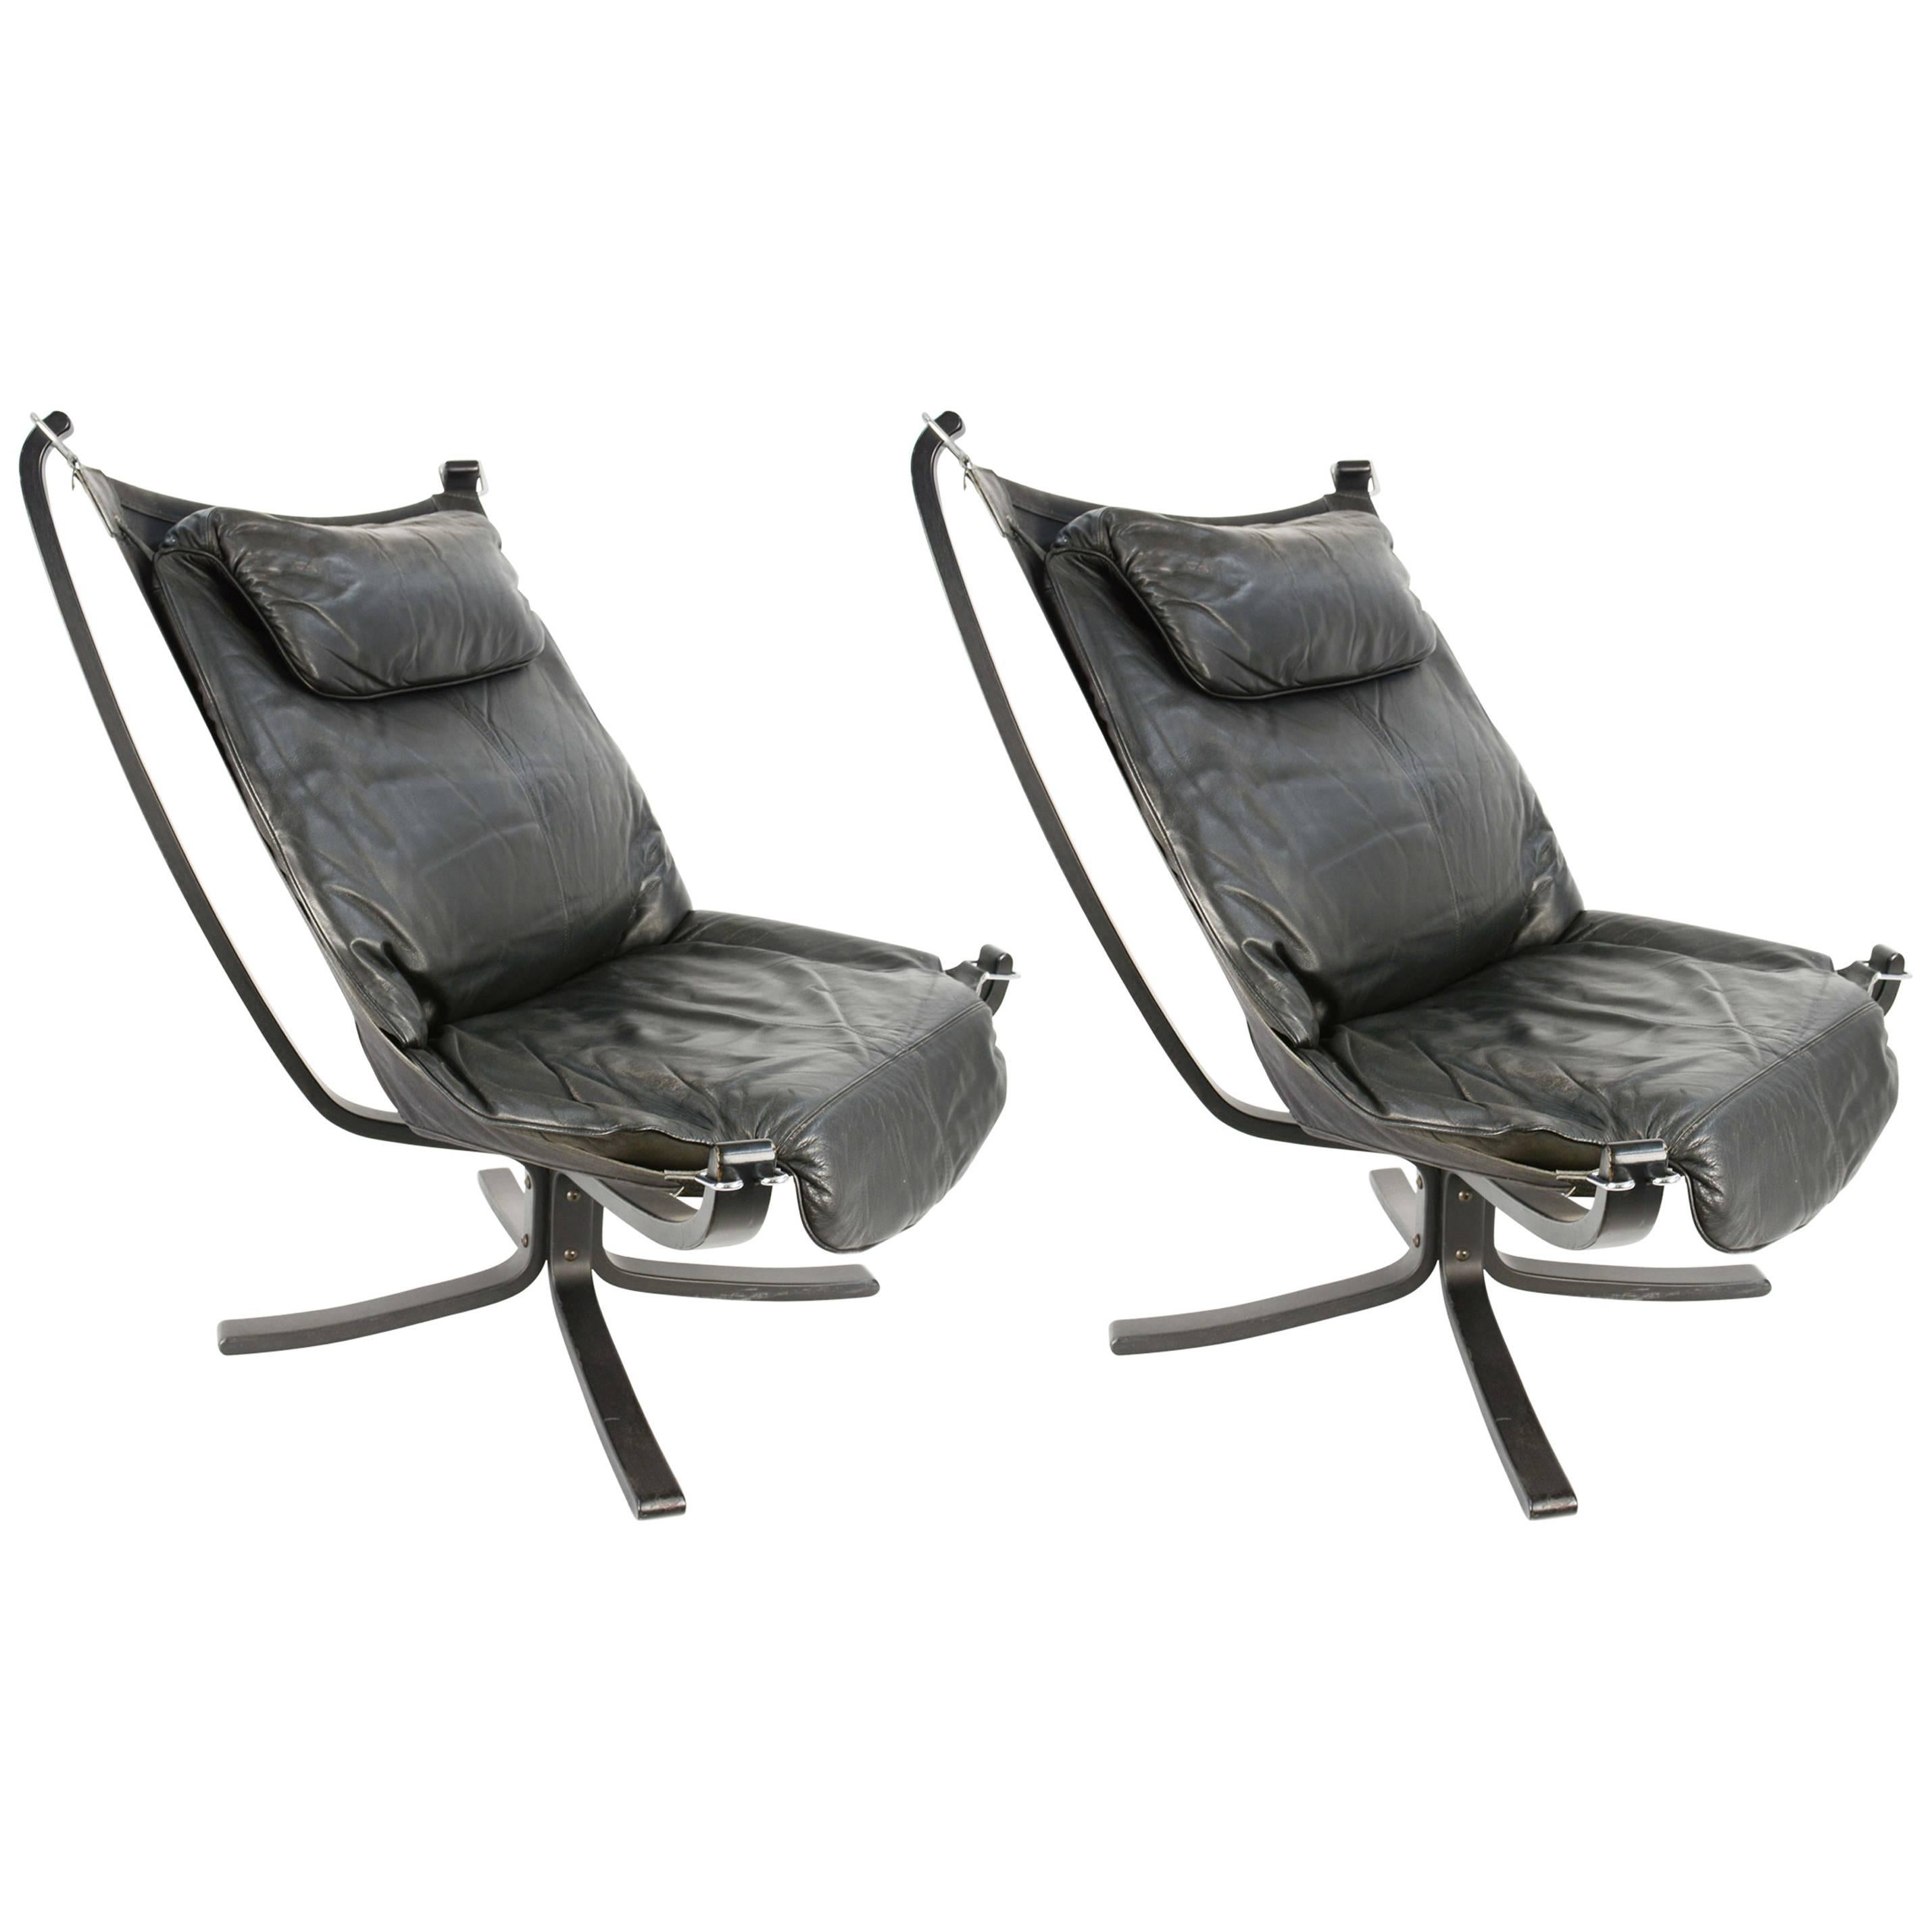  Two Pairs of Black on Black Falcon Chairs by Sigurd Resell for Vatne Møbler For Sale